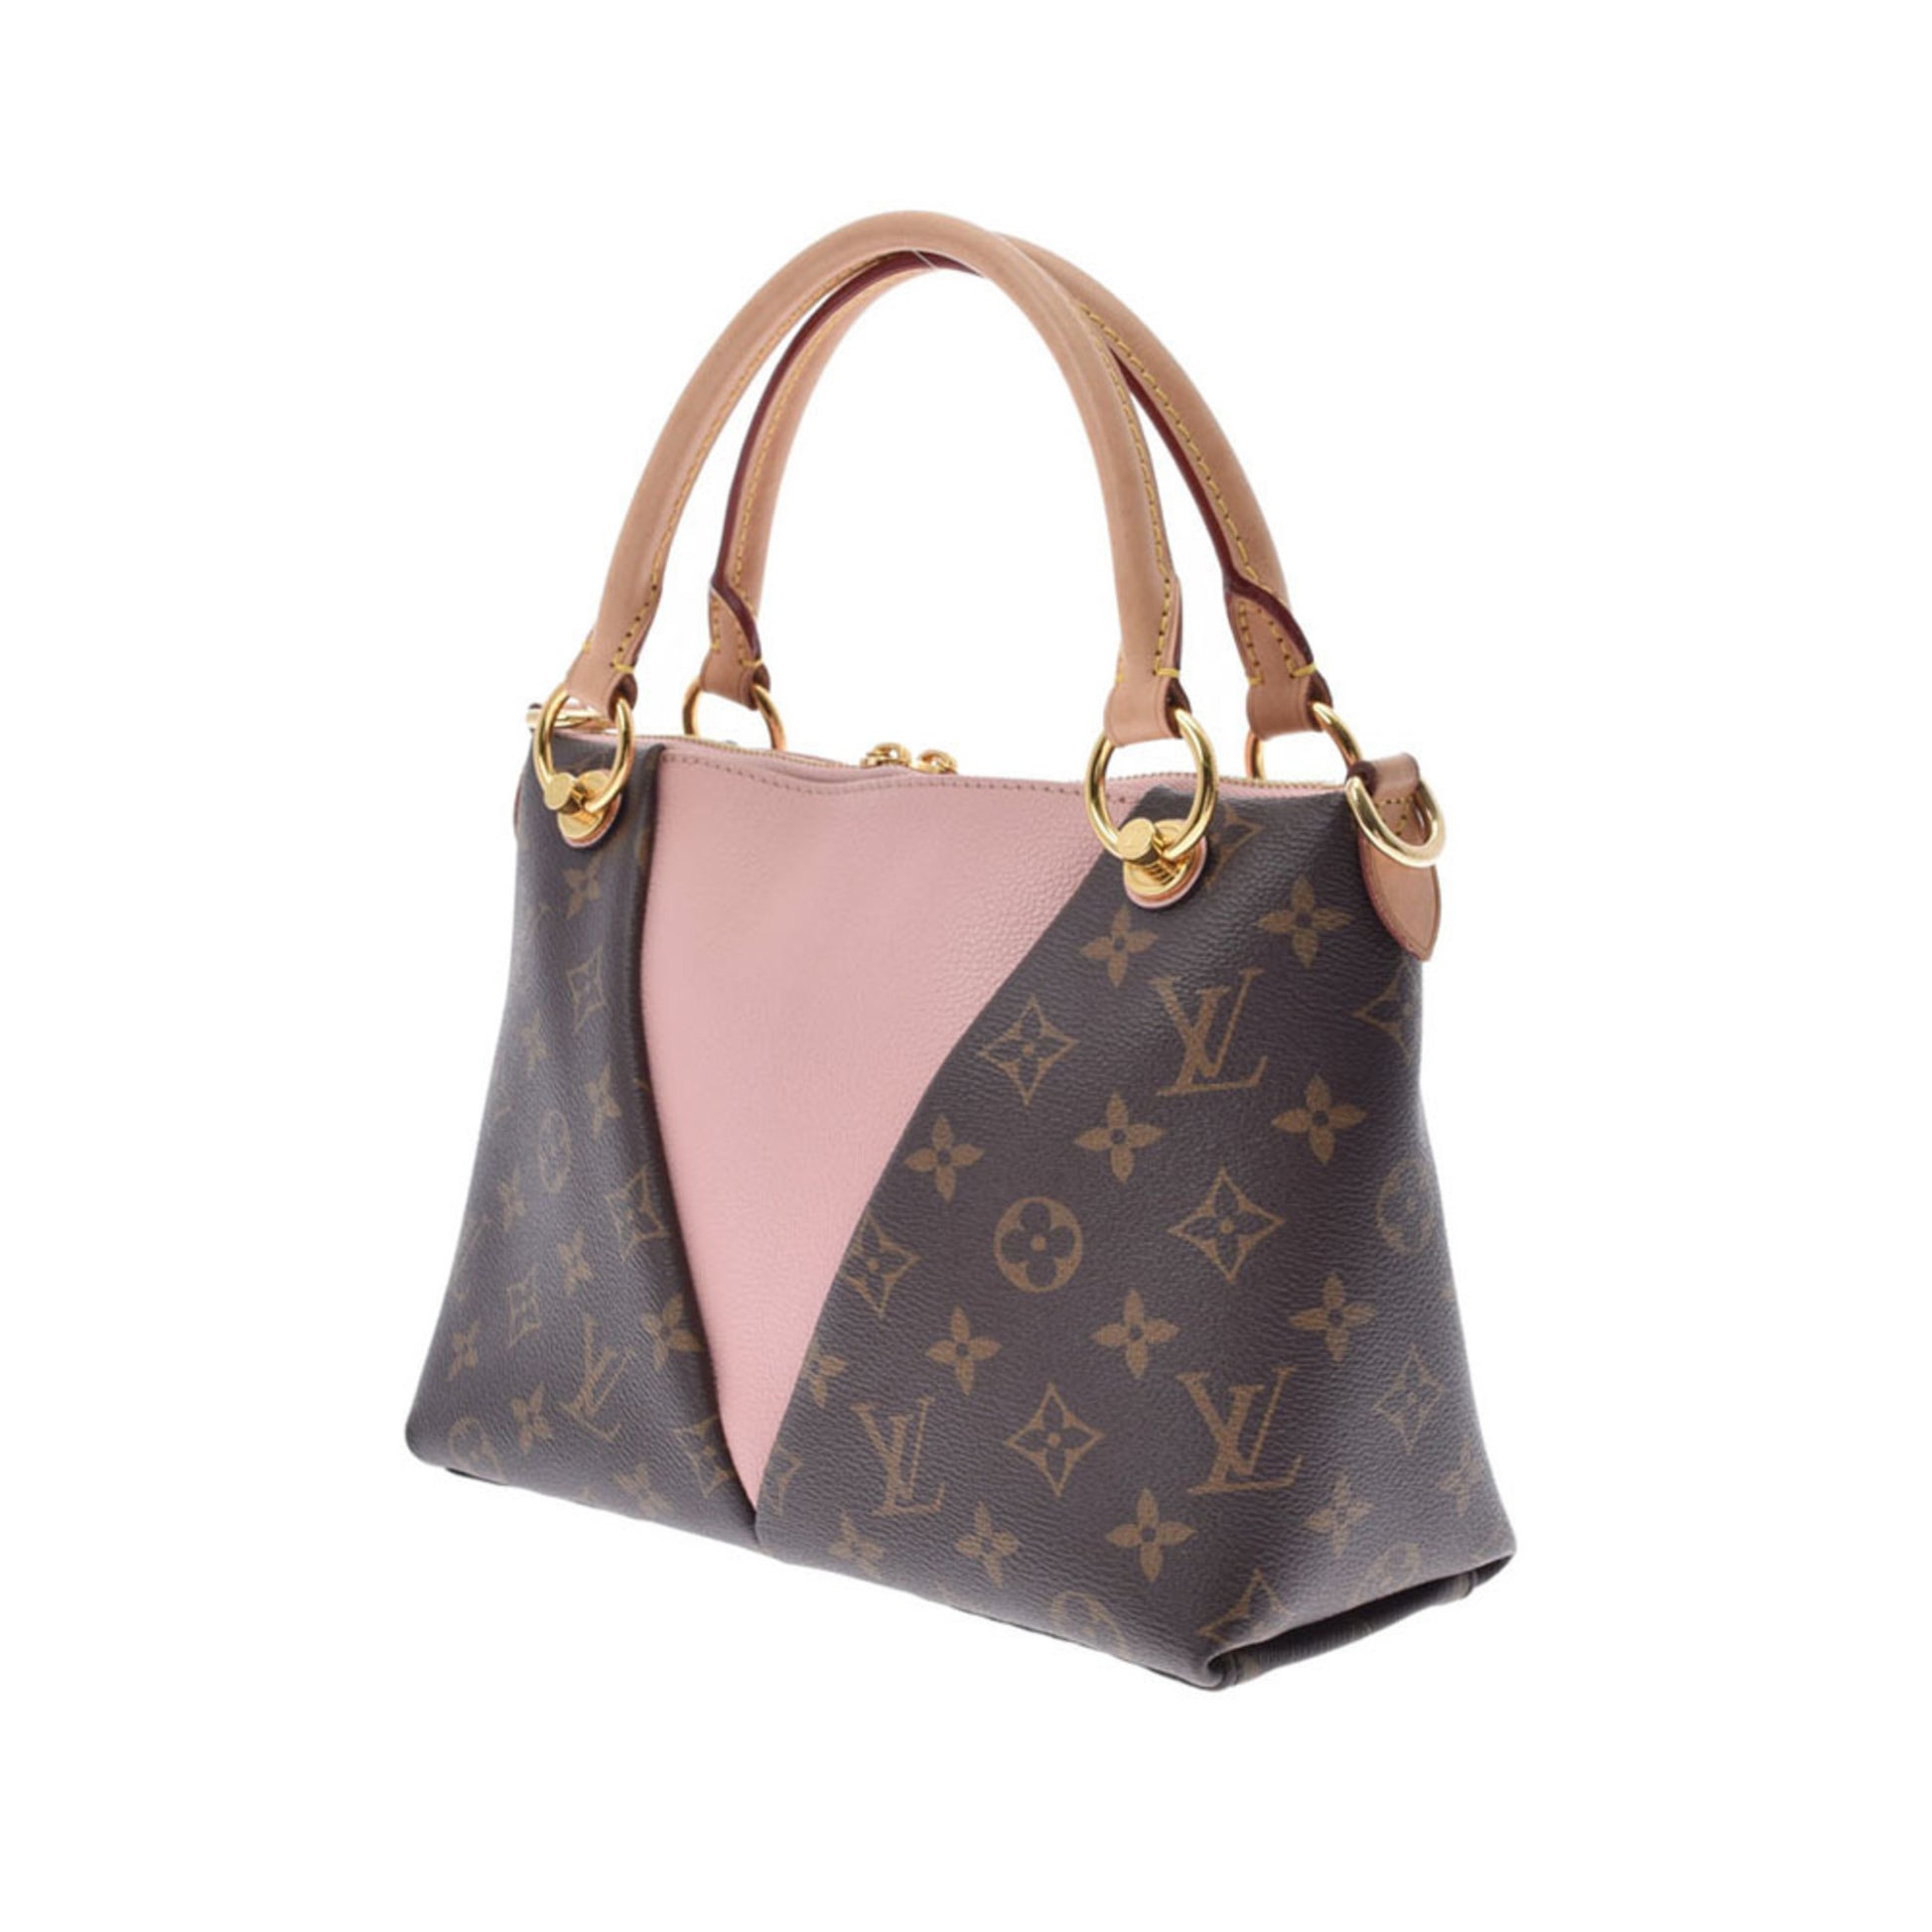 Authenticated Used Auth Louis Vuitton Monogram 2WAY Bag V Tote BB M43967  Rose Poudre 